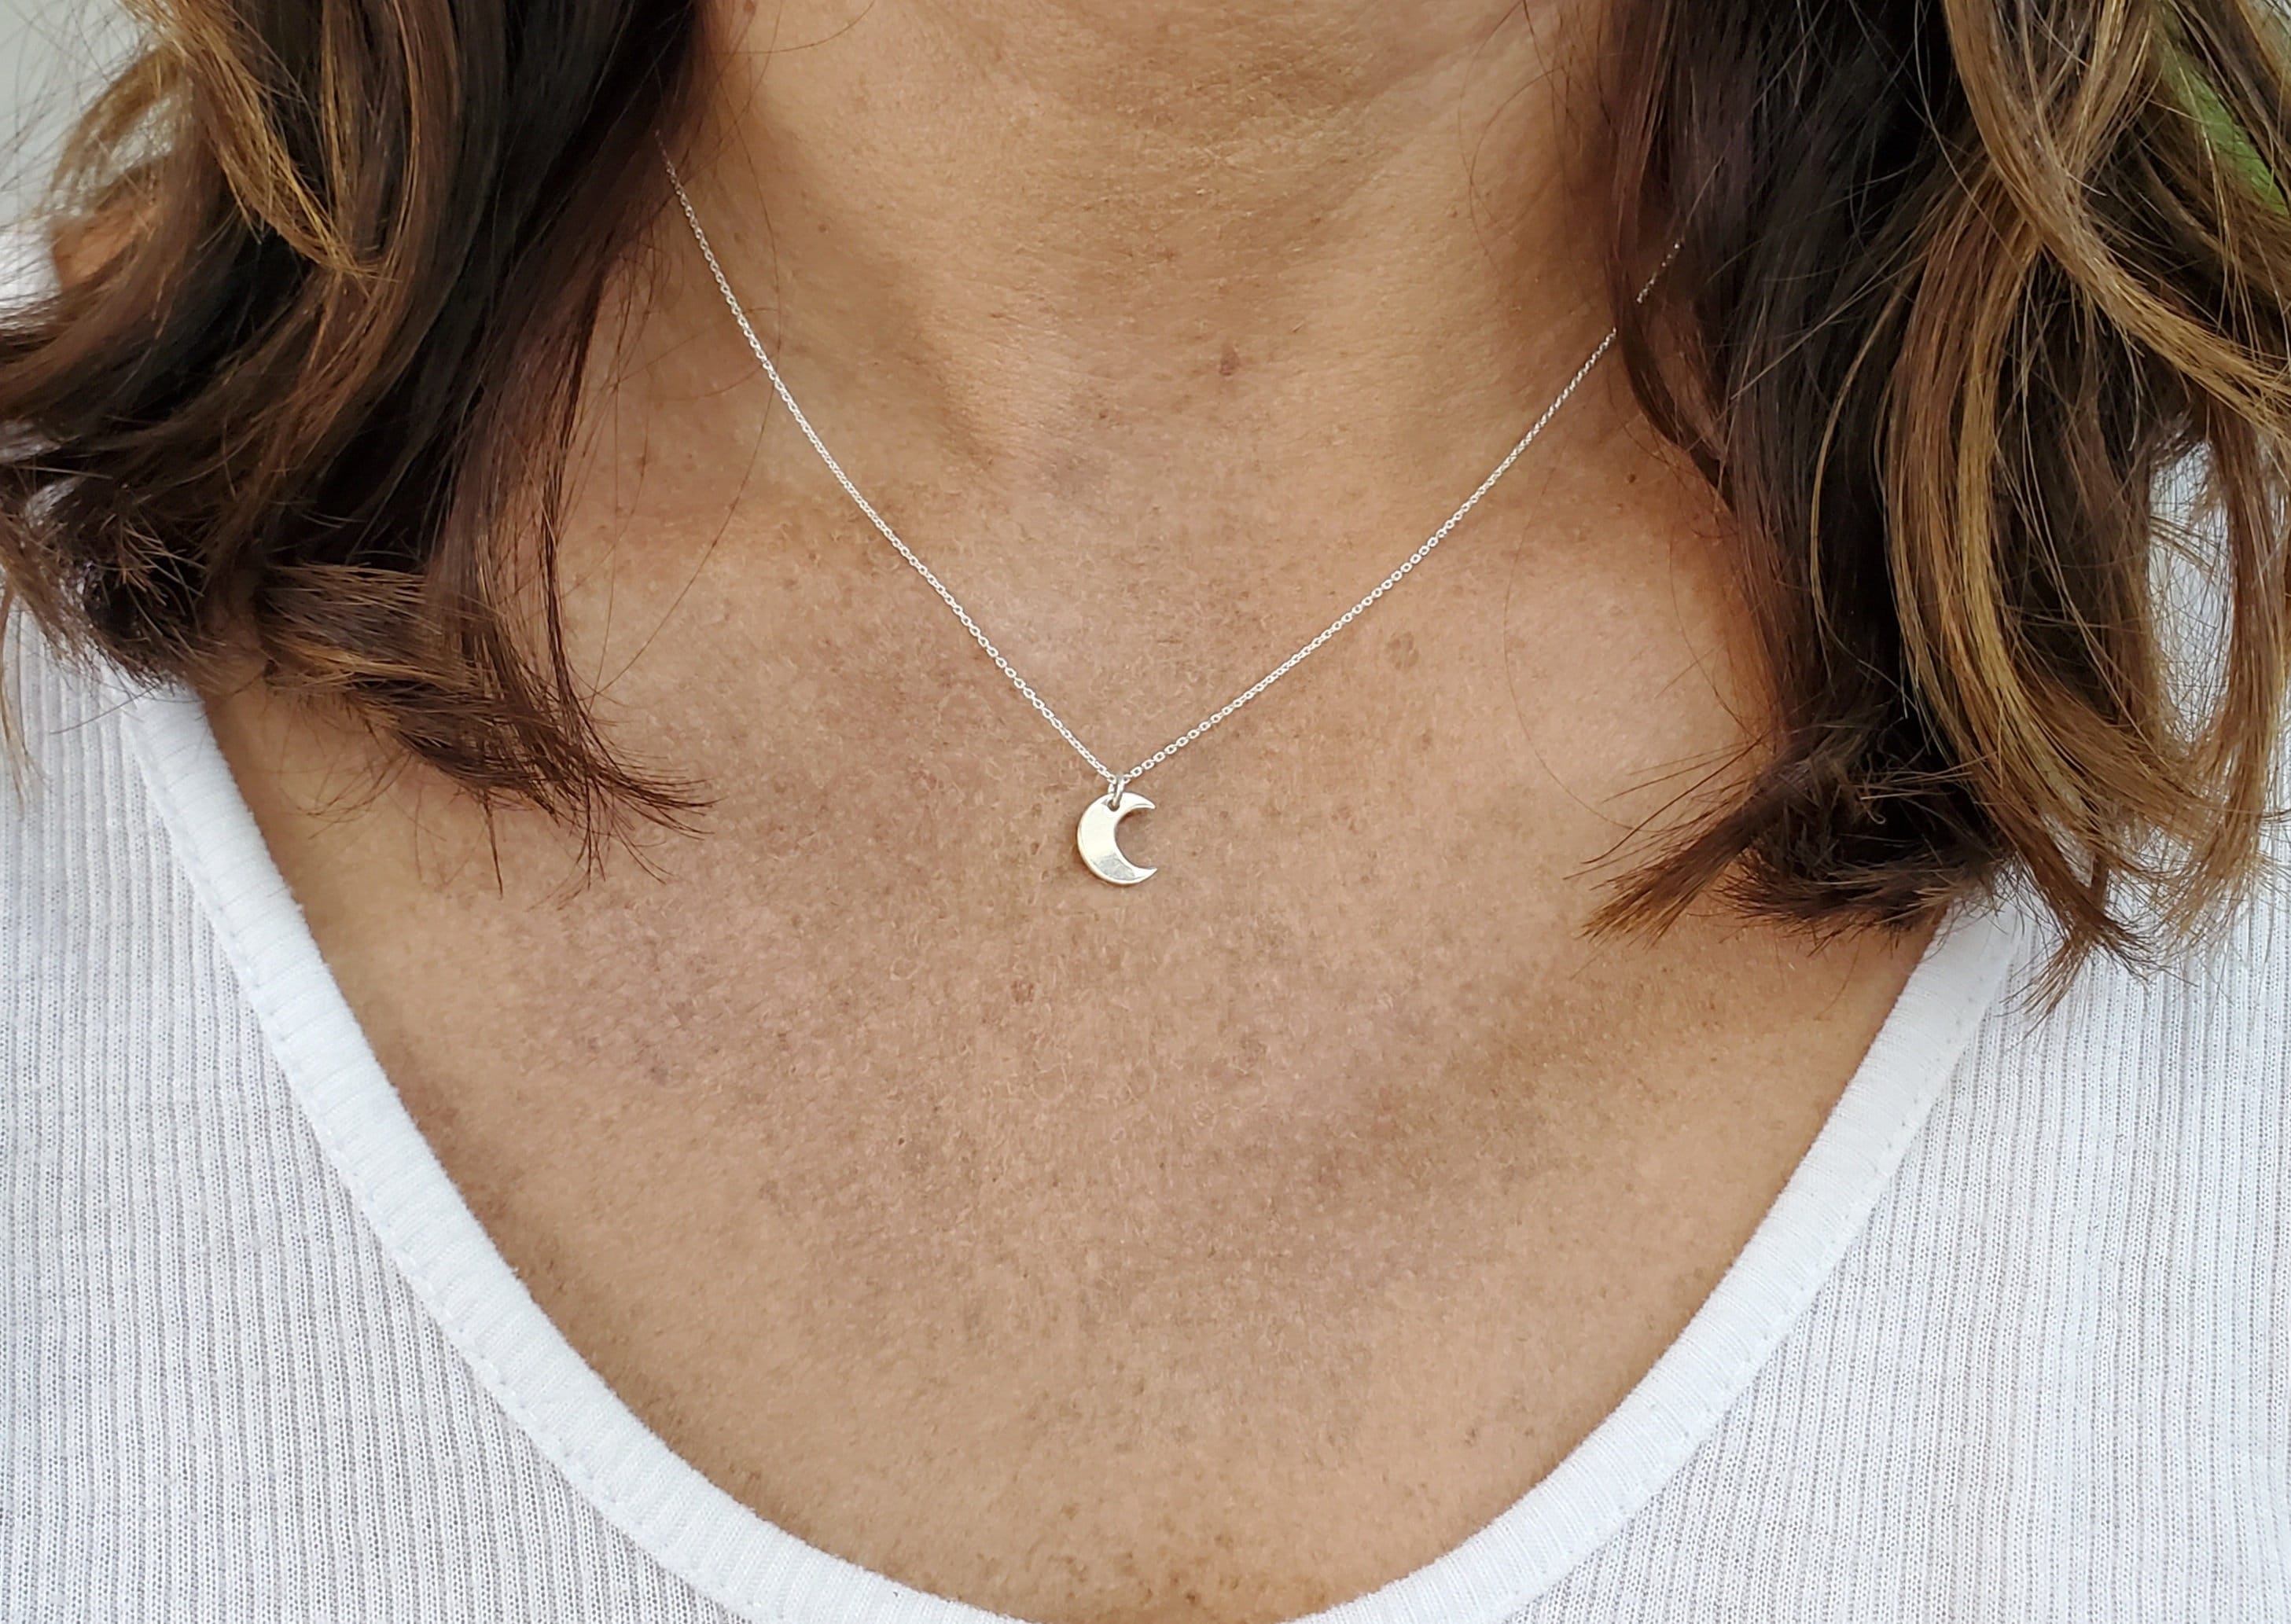 Crescent Necklace with Birthstone , Crescent Moon Necklace, Minimalist  Necklace, Gift For Her, Birthday Gift, Christmas Gifts ideas